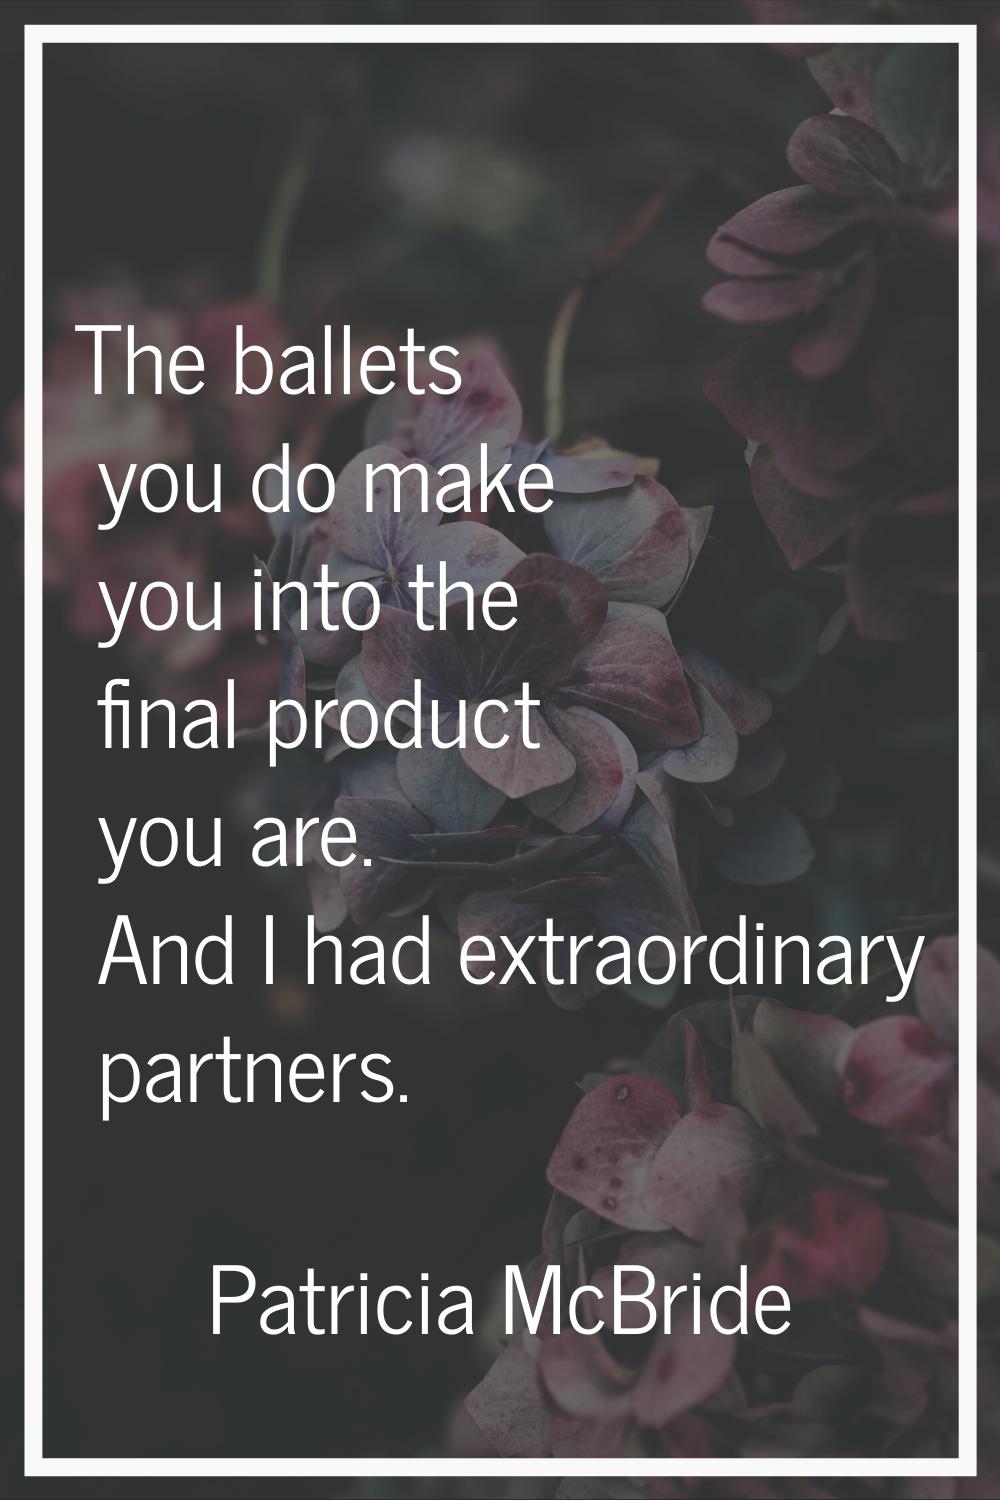 The ballets you do make you into the final product you are. And I had extraordinary partners.